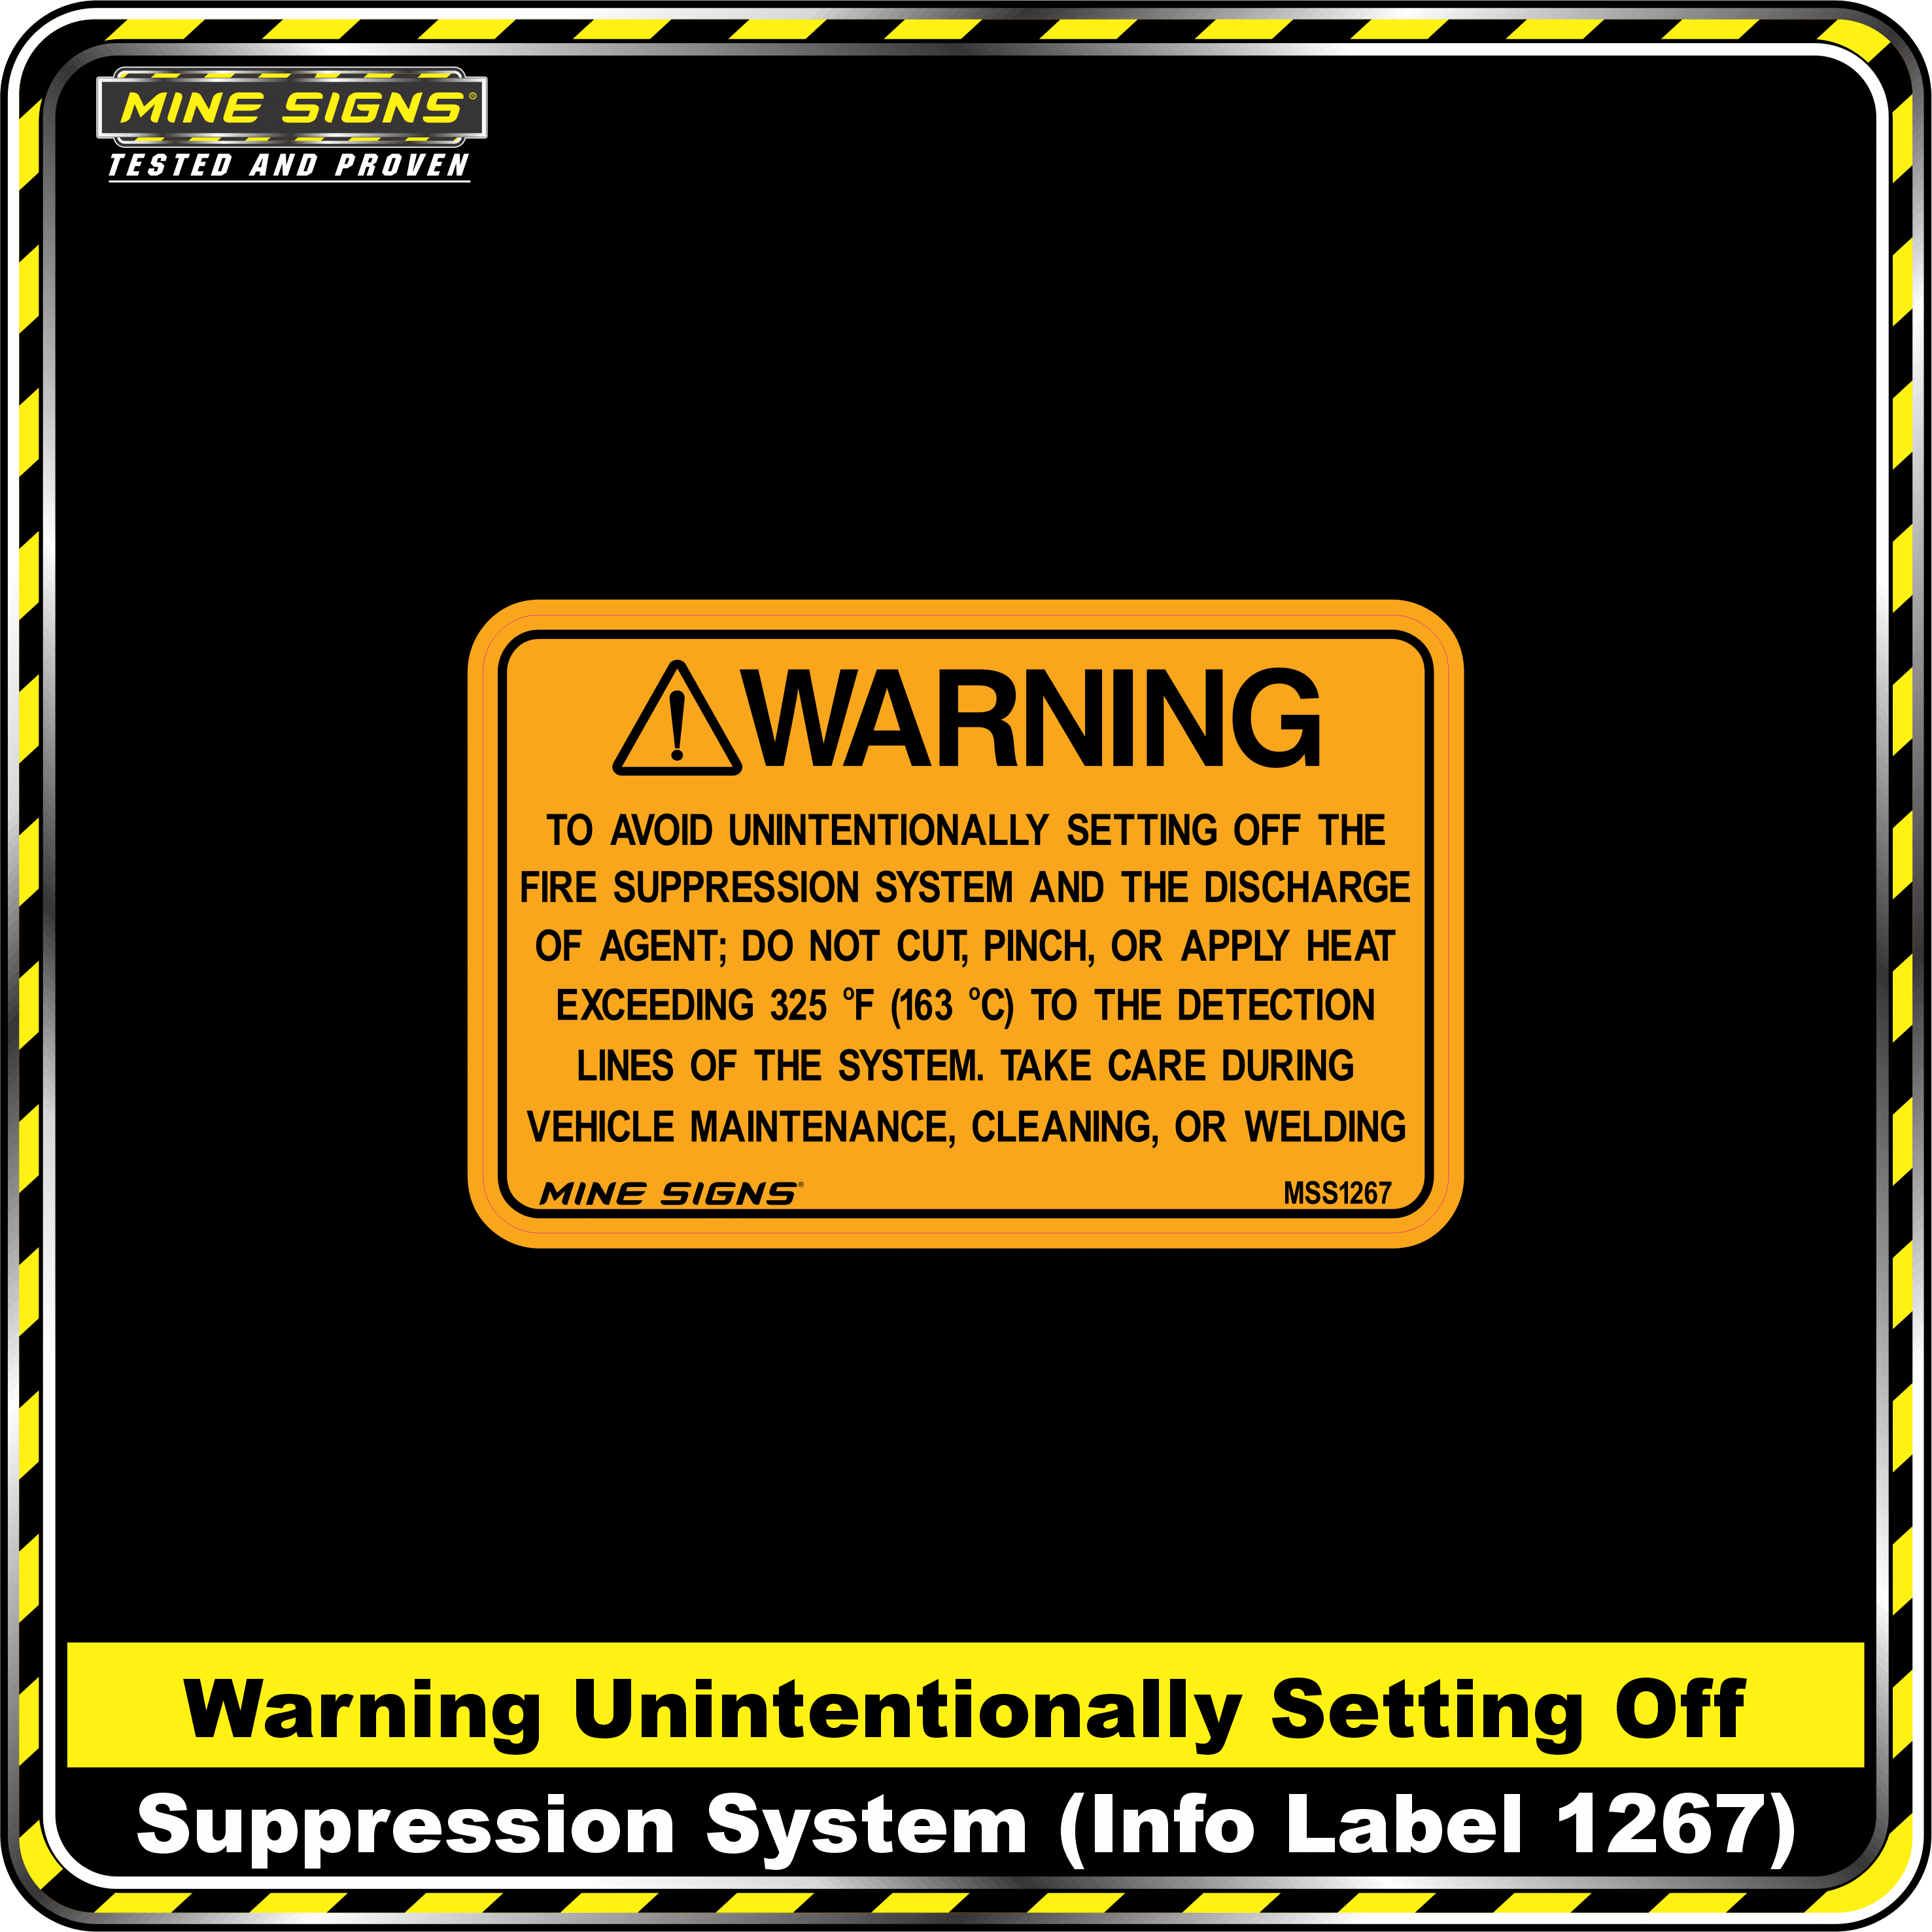 MS - Product Background - Safety Signs - Warning Unintentionally setting off Supression System 1267